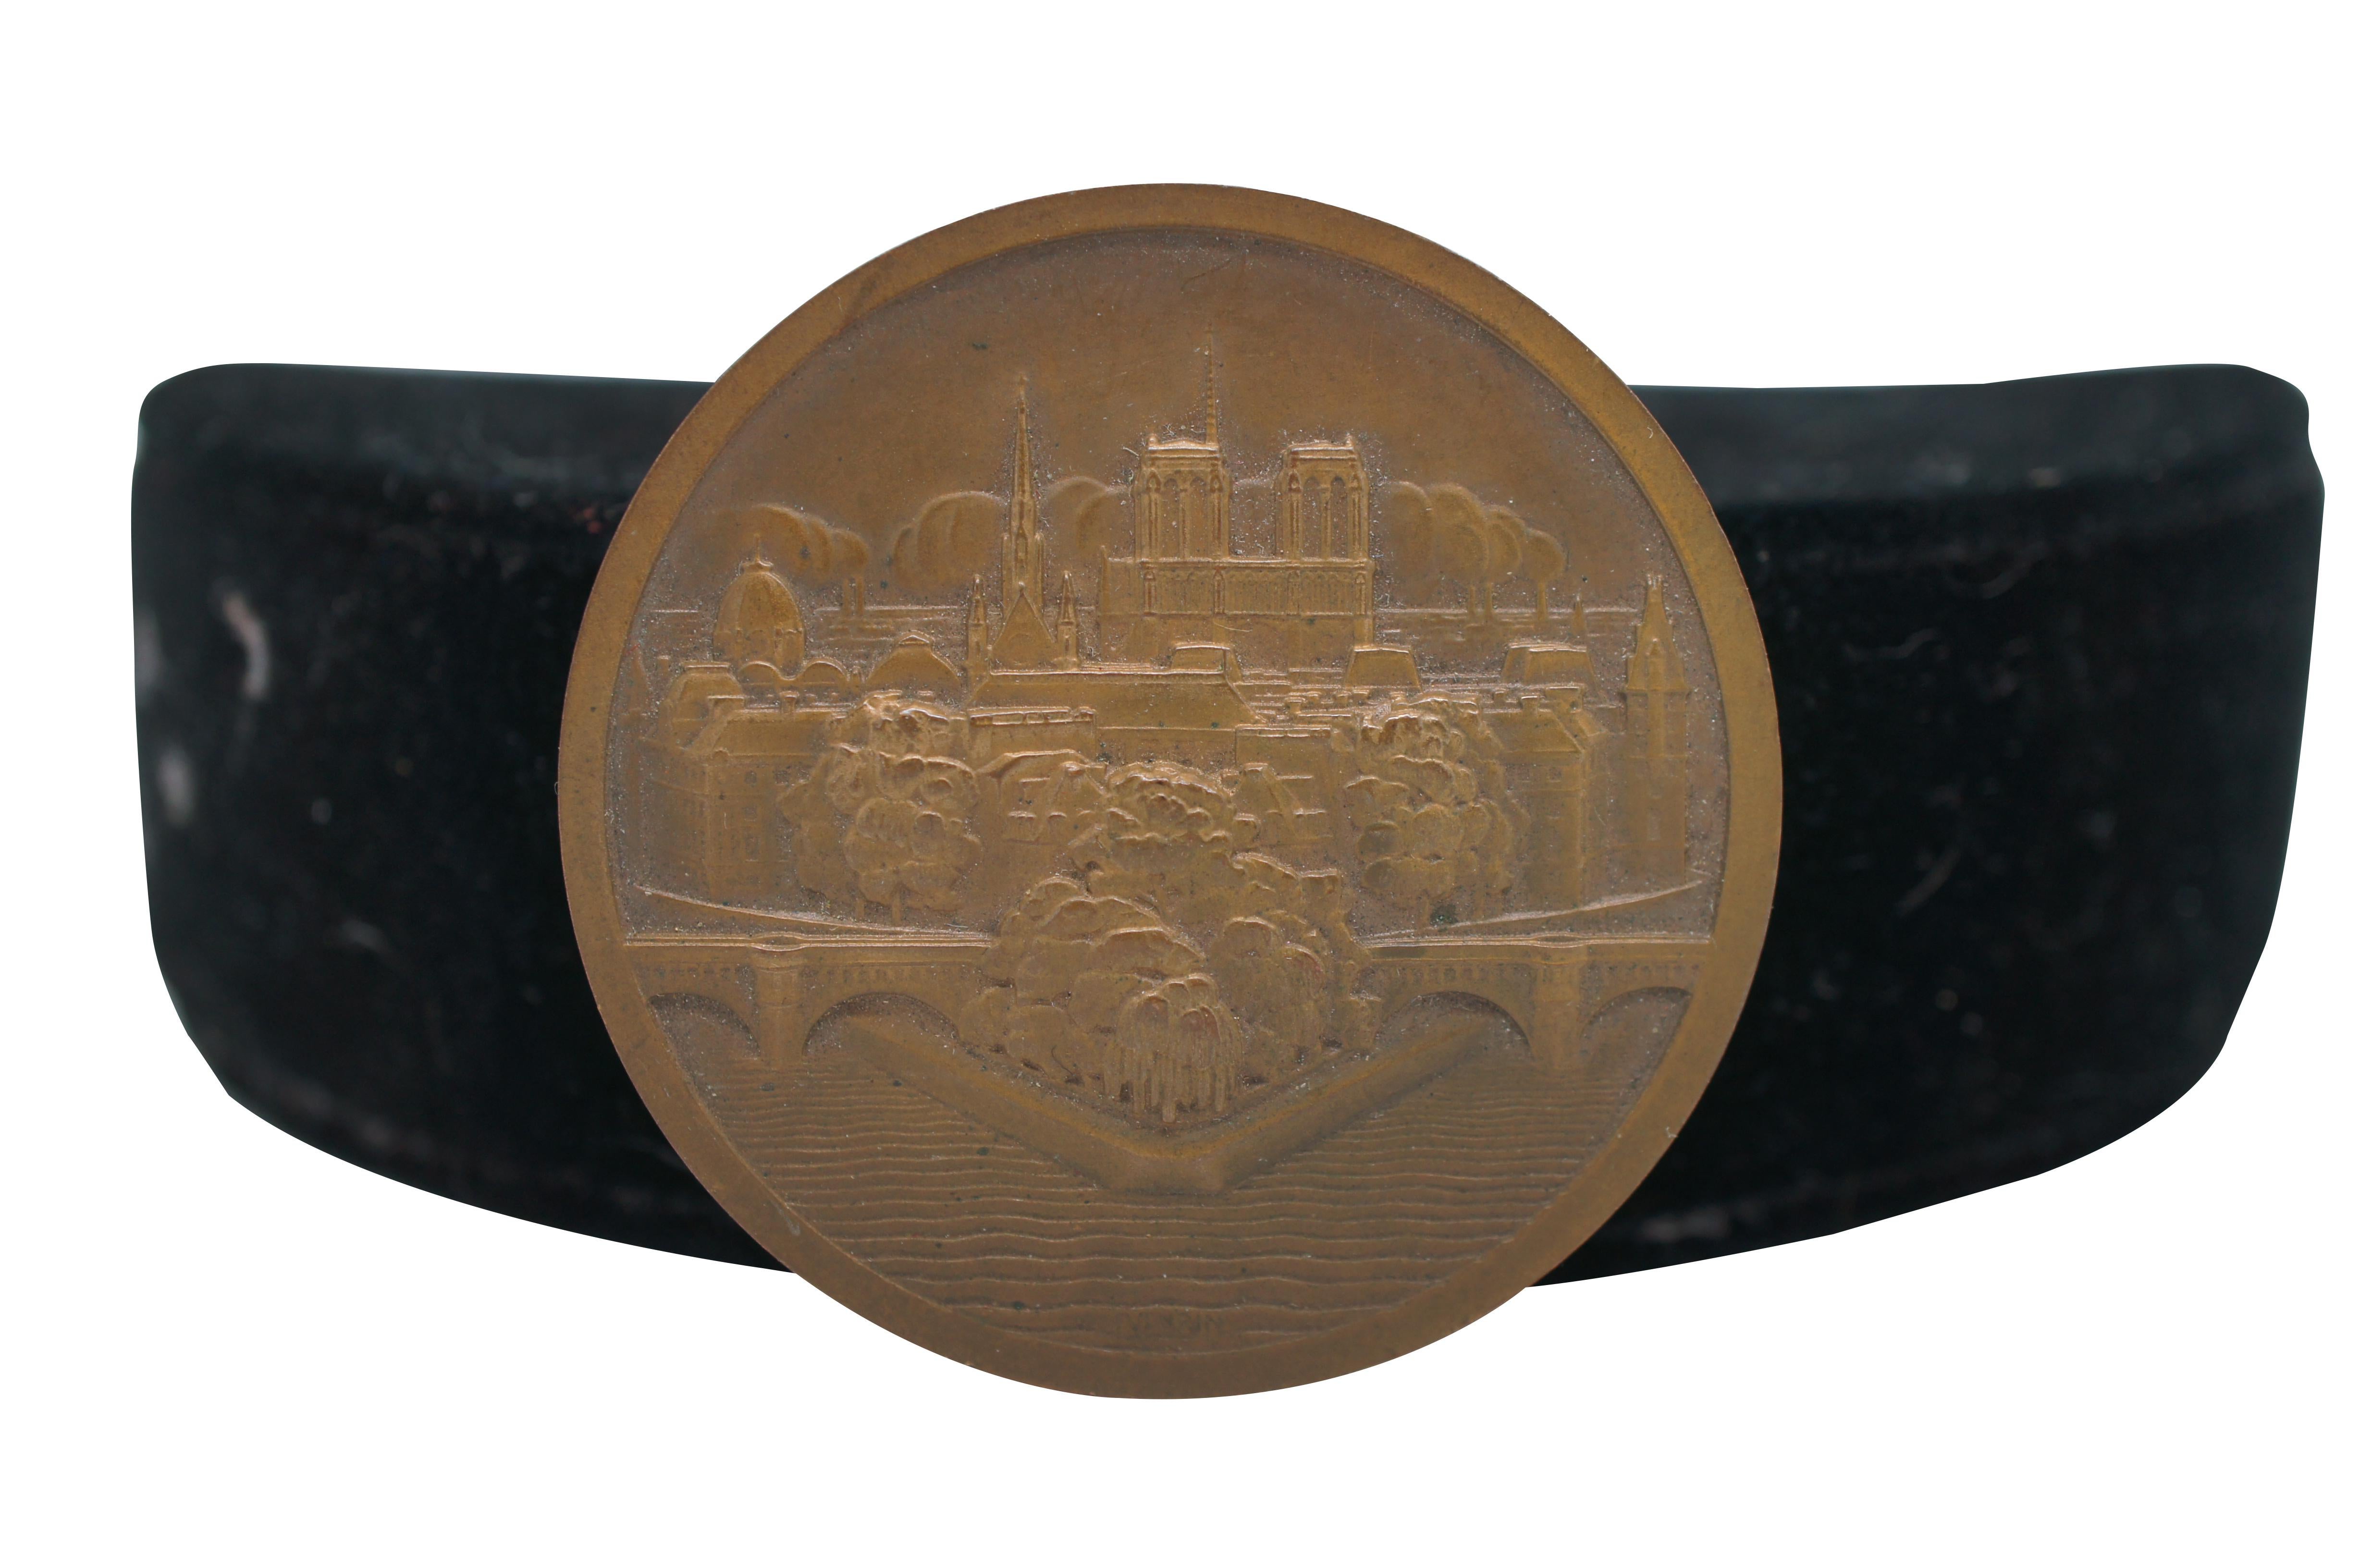 Mid to early 20th century Pierre Turin bronze medal featuring the Societe Francaise de Metallurgie and the city of Paris landscape including Notre Dame

Pierre TURIN (1891-1968). French medalist. He studied at École Nationale Supérieure des